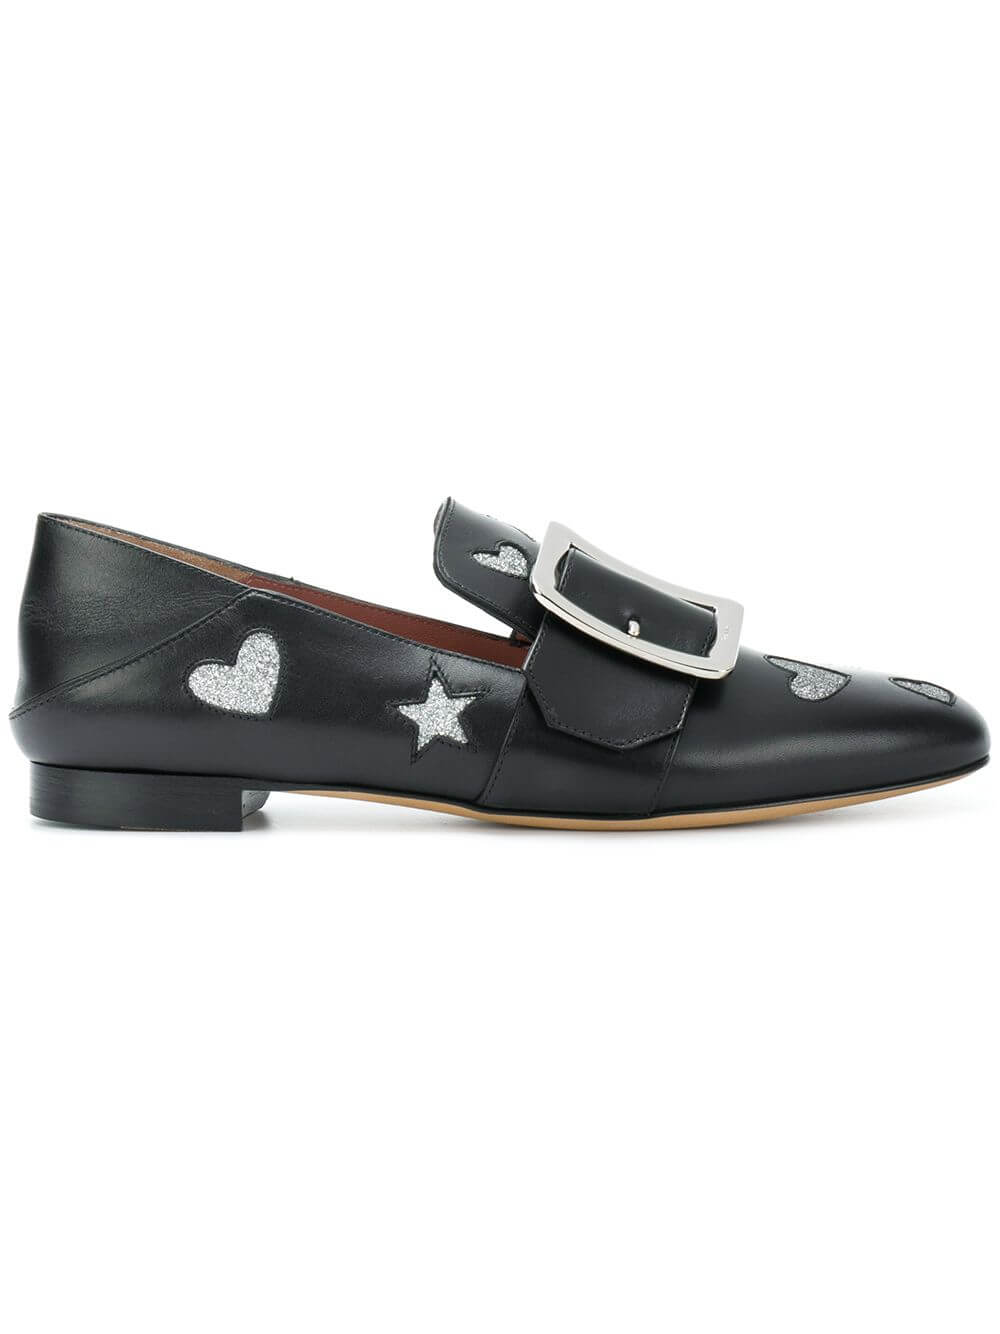 NEW Bally Janelle Hearts Women's 6221029 Black Leather Loafers US 7 MSRP $675